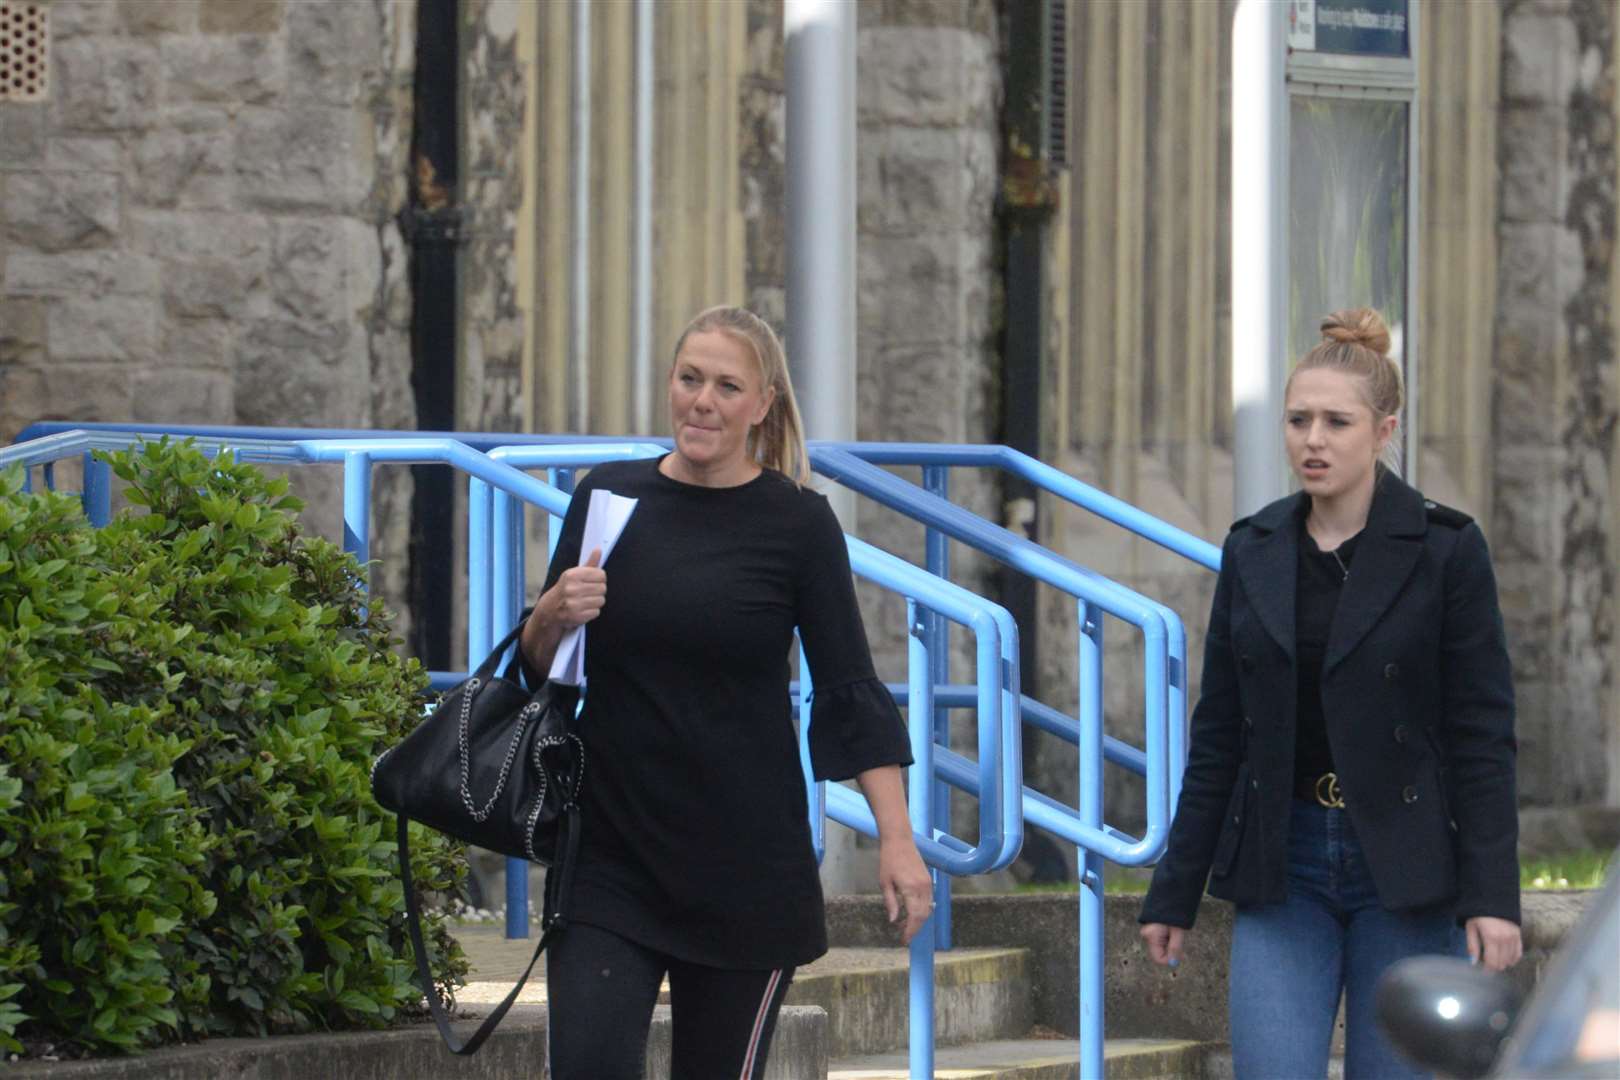 Julie and Olivia Cooke arriving at Maidstone Magistrates Court. Picture: Chris Davey